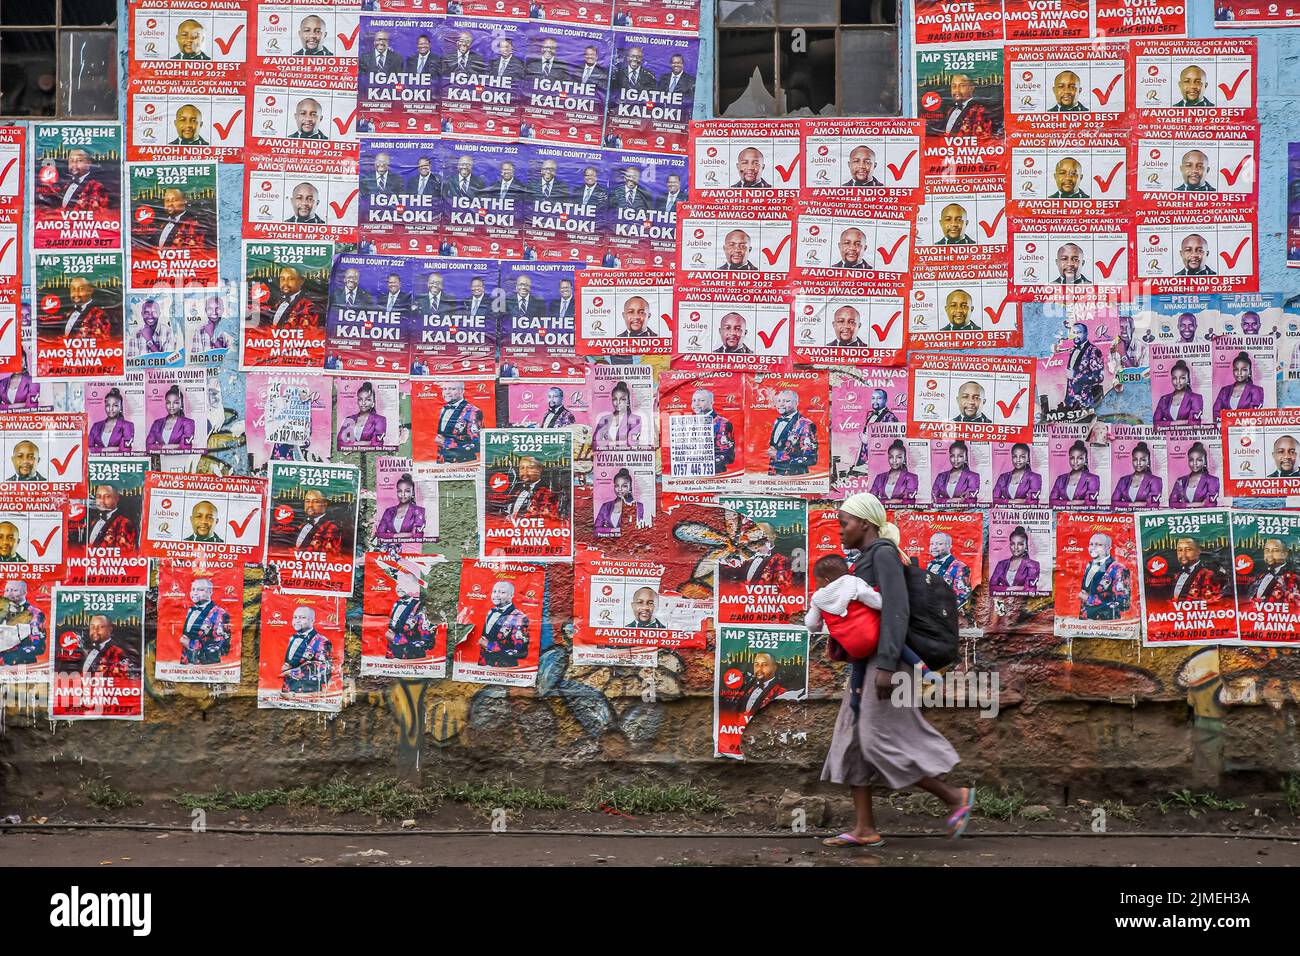 A woman carries her child as she walks past political campaign posters along Haile Selassie avenue in Nairobi, as Kenyans prepare to vote on the 9th August 2022 general elections. Politicians continue to campaign in different parts of the country to seek votes from Kenyans. Political campaign billboards, posters, branded cars, umbrellas, tshirts and banners are seen everywhere general elections campaign. Kenyans will head to the polls on August 9, 2022, to elect a new president, as well as members of the National Assembly and Senate, county governors, county woman representatives and members o Stock Photo